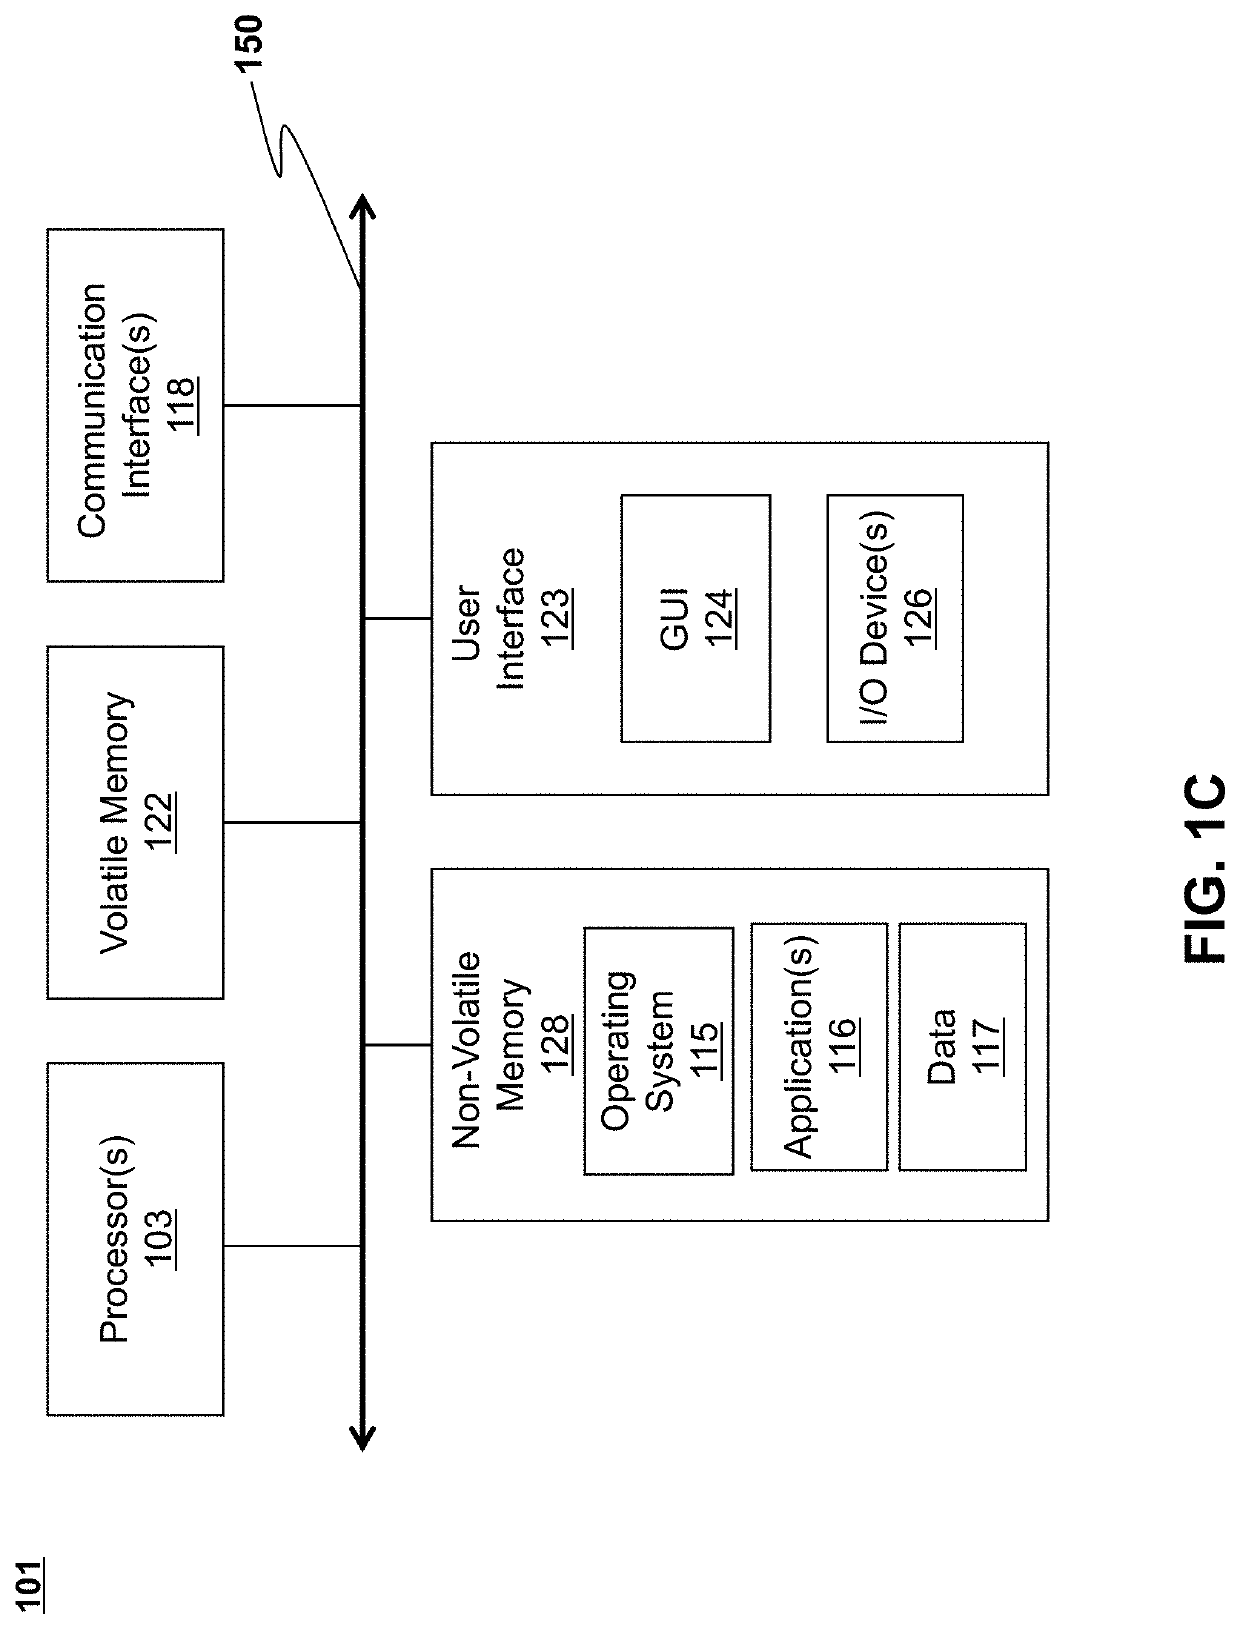 Systems and methods for managing releases of global services in a controlled manner